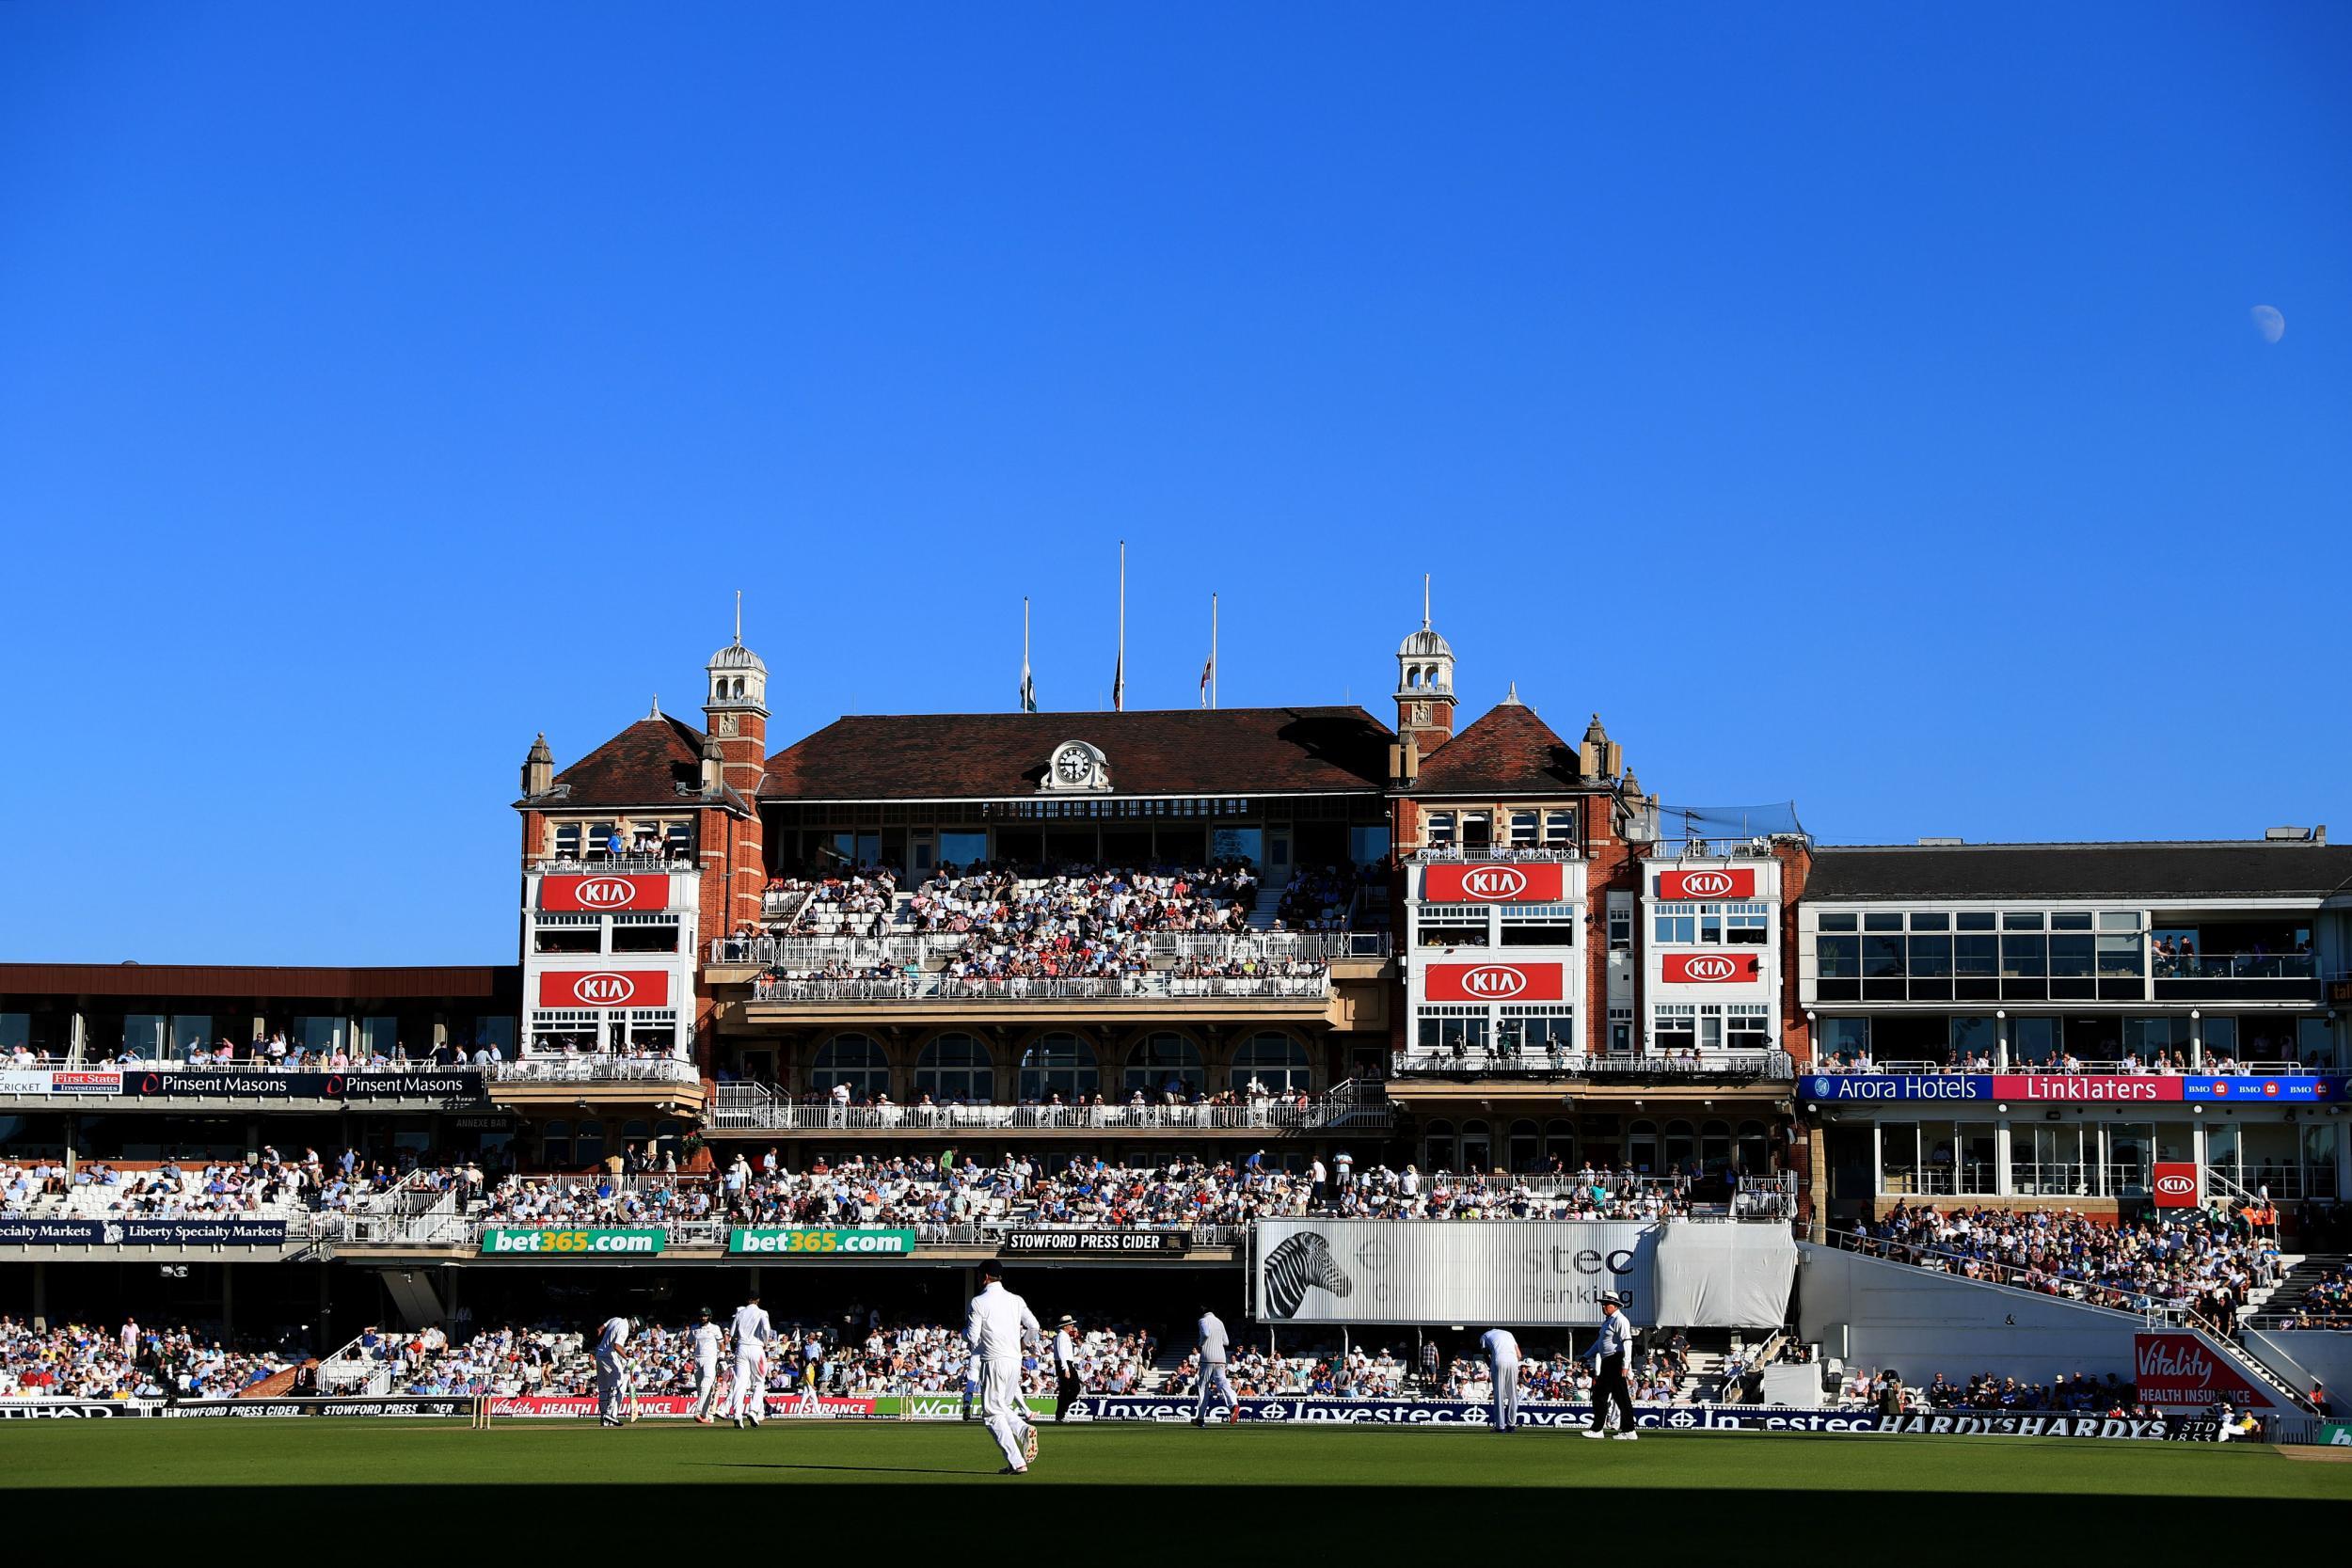 The Homeless Helpline auction includes the chance to bid for two tickets to the 100th Test Match at the Kia Oval, when England play South Africa.